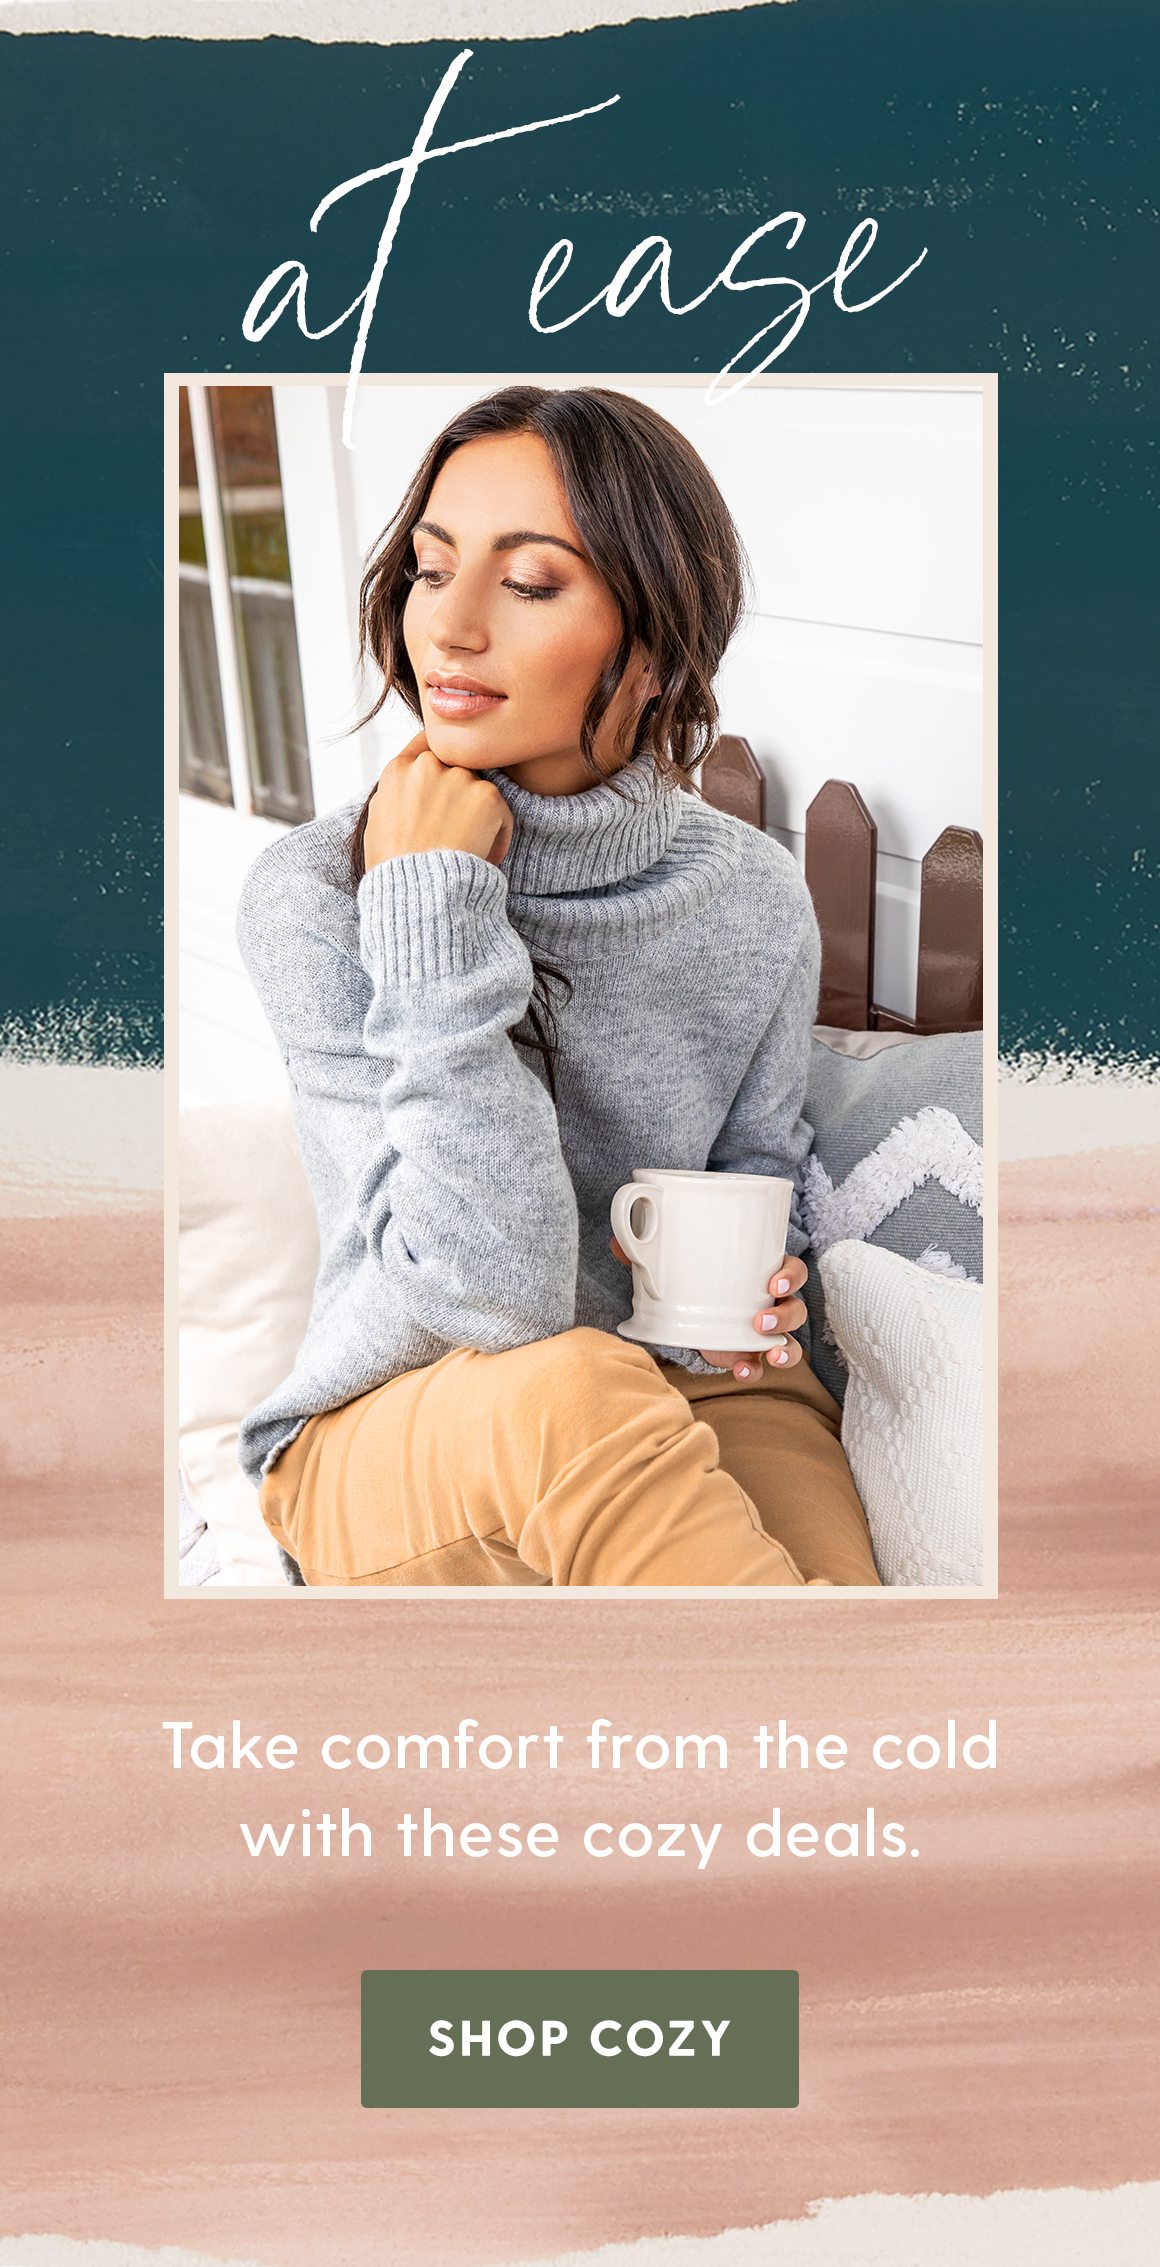 Take comfort from the cold with theses cozy deals. Shop cozy.